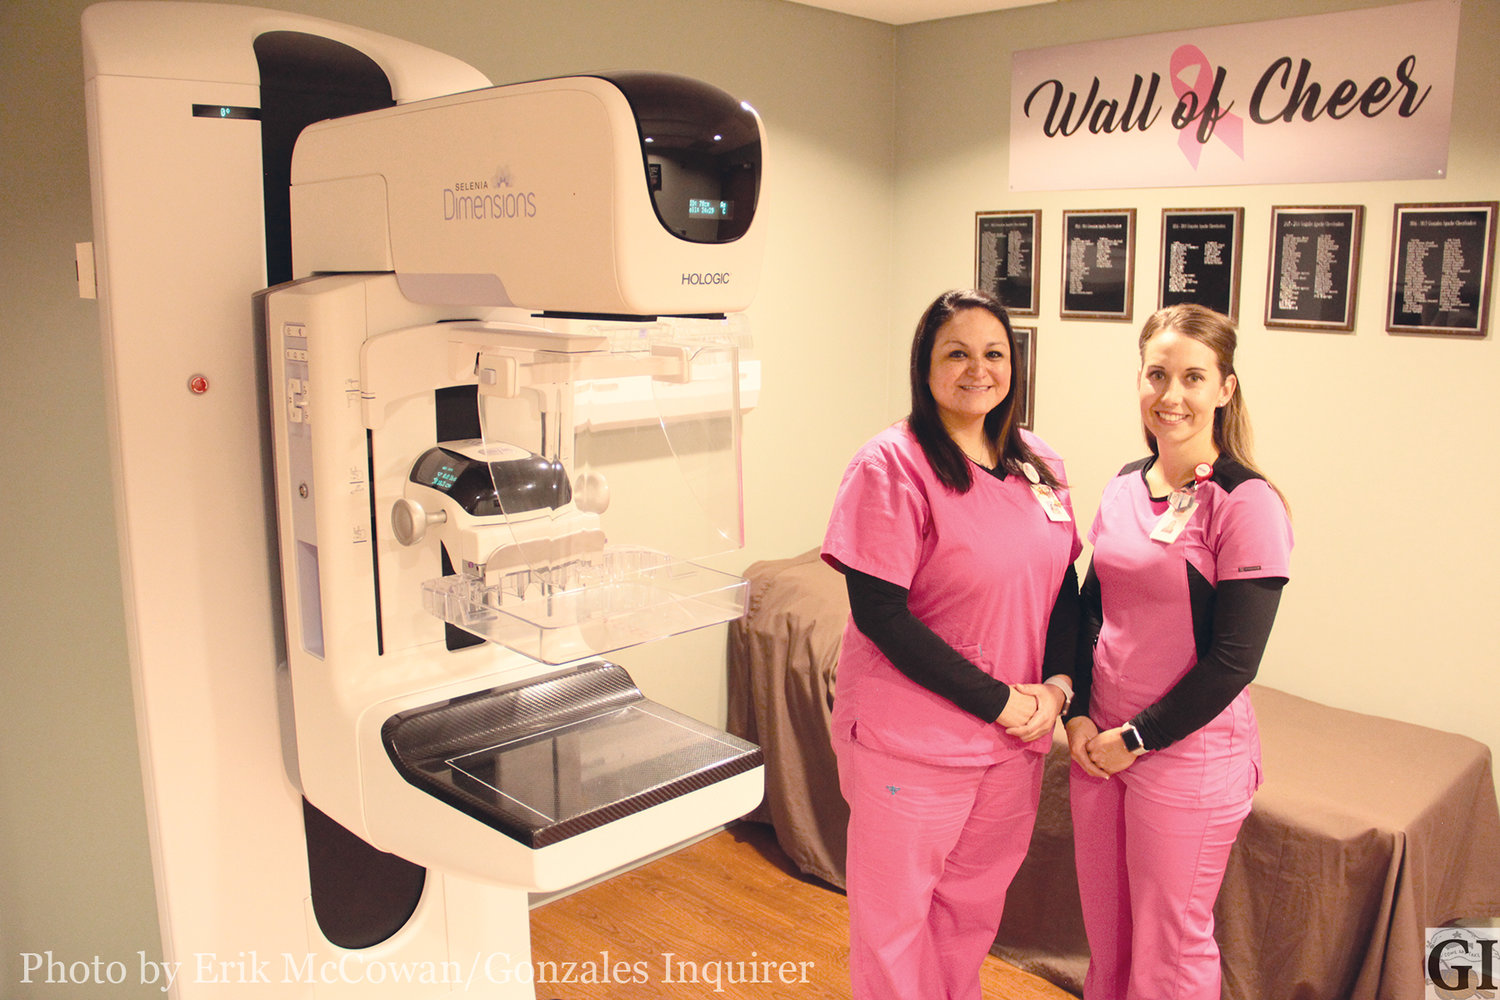 Kristy Garcia, left, and Kasey Spahn head up the mammography department at Gonzales Healthcare Systems. They are there to offer quality service and state-of-the-art technology to screen for breast cancer.